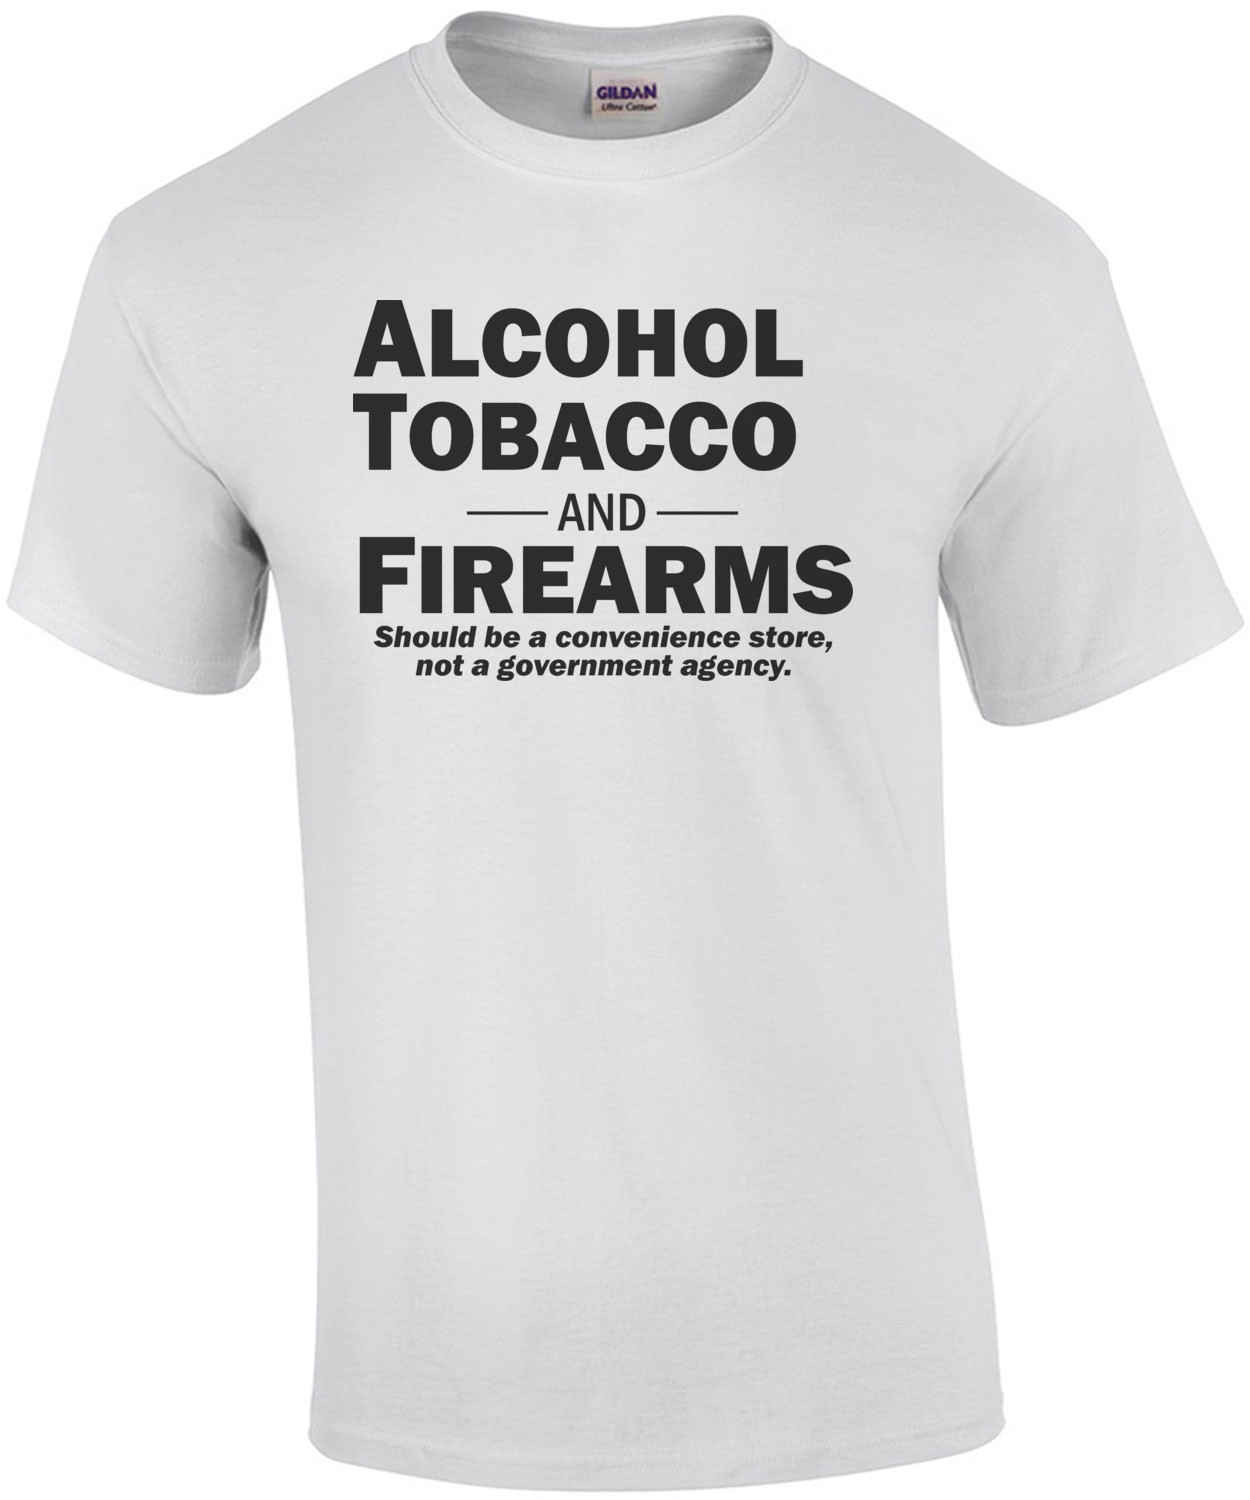 Alcohol Tobacco and Firearms...